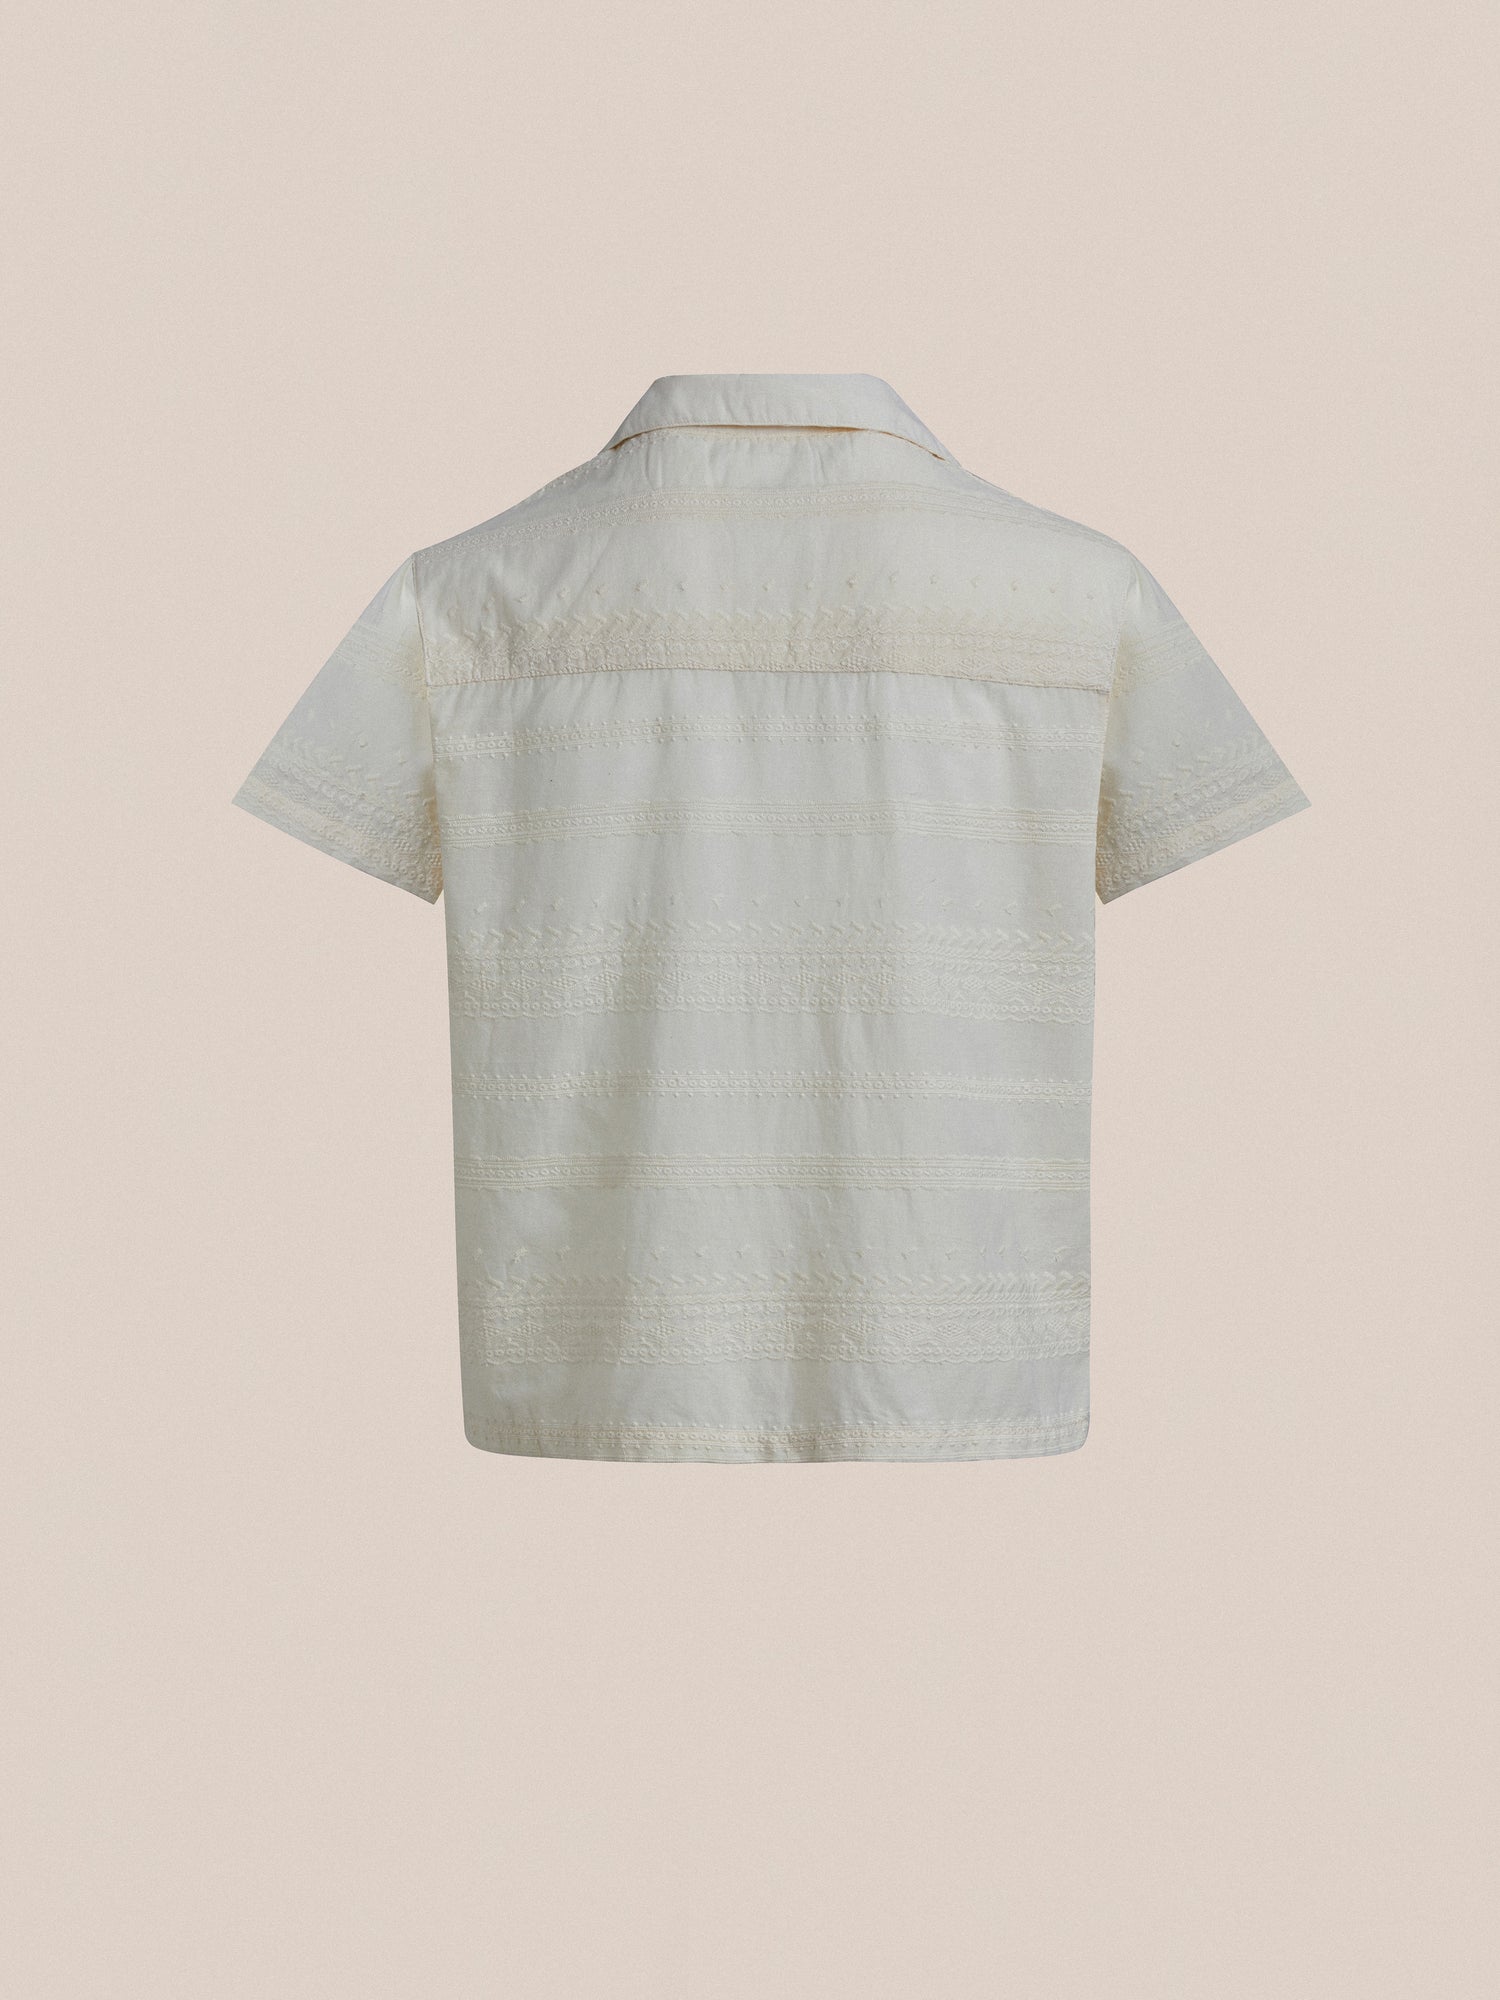 The back view of a Found Lace SS Camp Shirt with white stripes and delicate lace detailing.